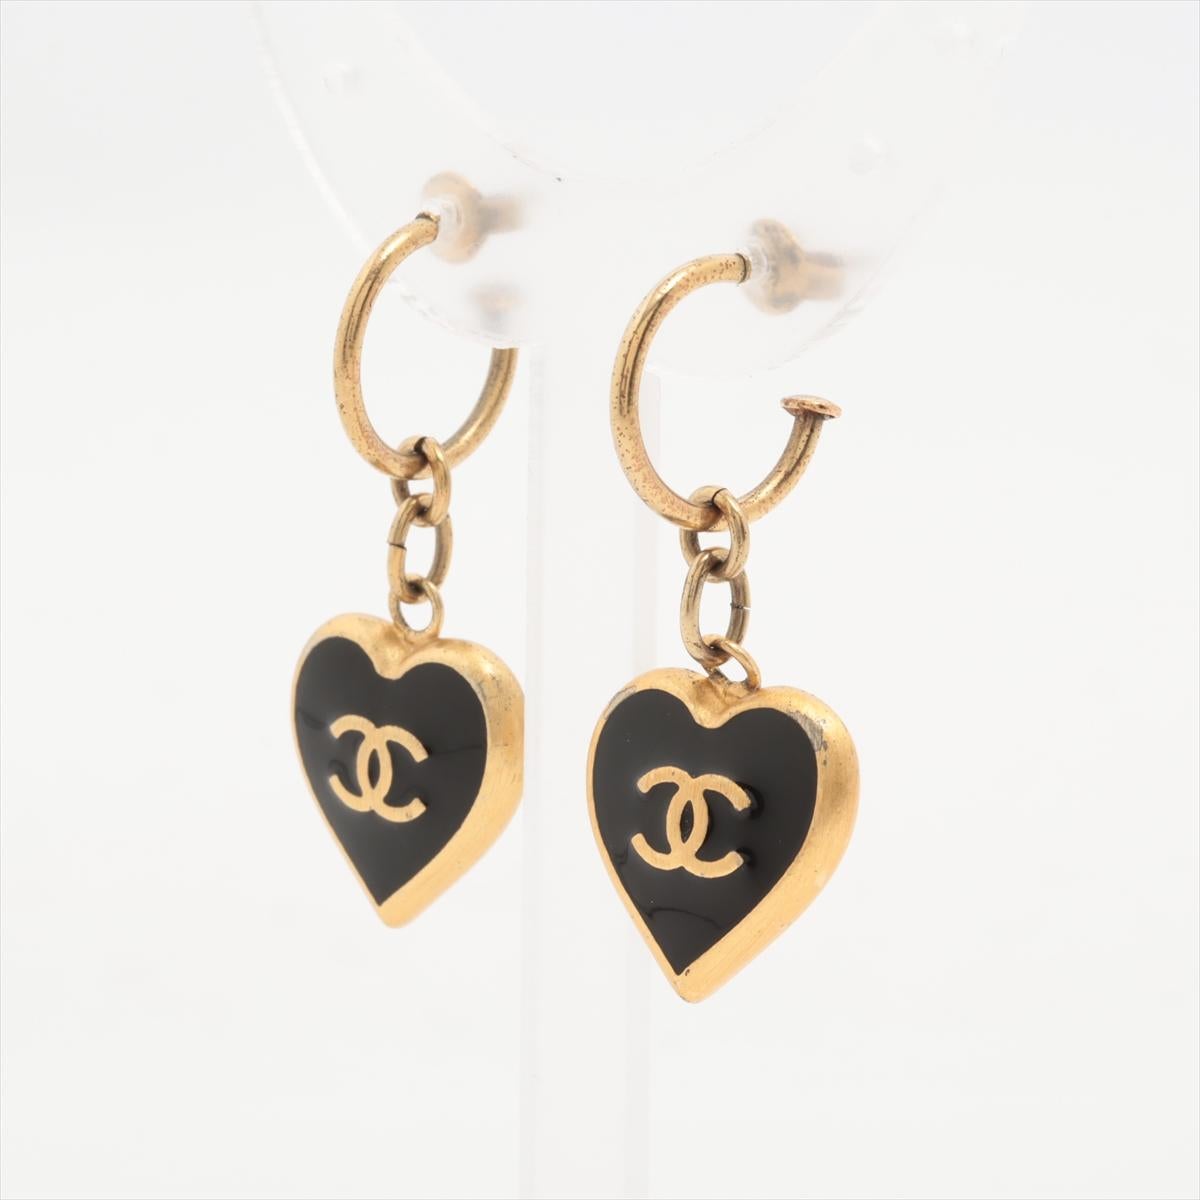 The Chanel CC Logo Heart Hoop Dangle Earring in Gold with Black Enamel is a stunning blend of elegance and charm. The earrings feature sleek gold-tone hoops adorned with delicate black enamel hearts and the iconic Chanel CC logo. The contrast